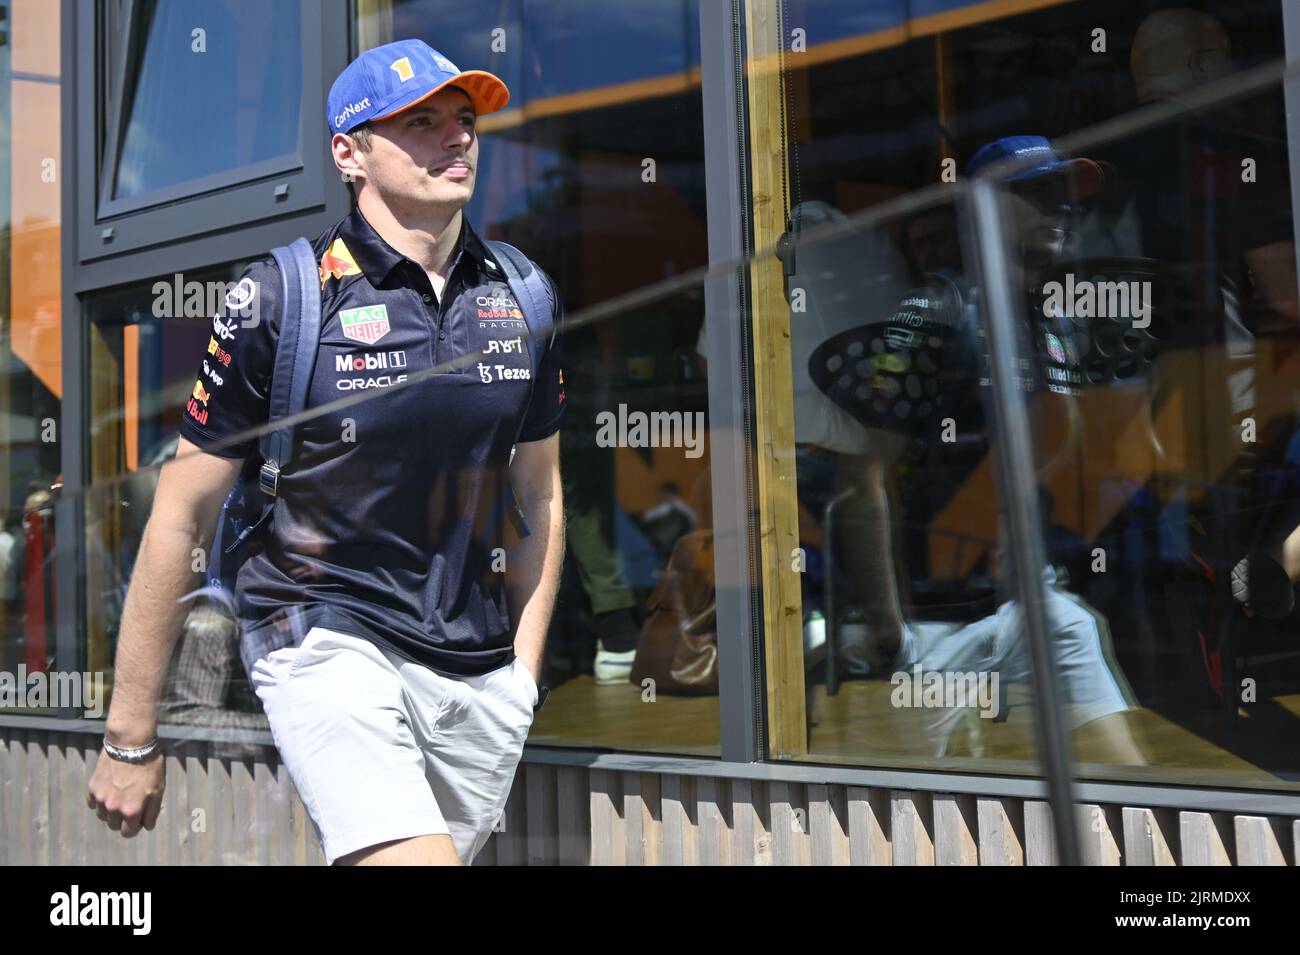 Red Bull Racing's Dutch driver Max Verstappen arrives for preparations for the Grand Prix F1 of Belgium race, in Spa-Francorchamps, Wednesday 24 August 2022. The Spa-Francorchamps Formula One Grand Prix takes place this weekend, from August 26th to August 28th. BELGA PHOTO DIRK WAEM Stock Photo